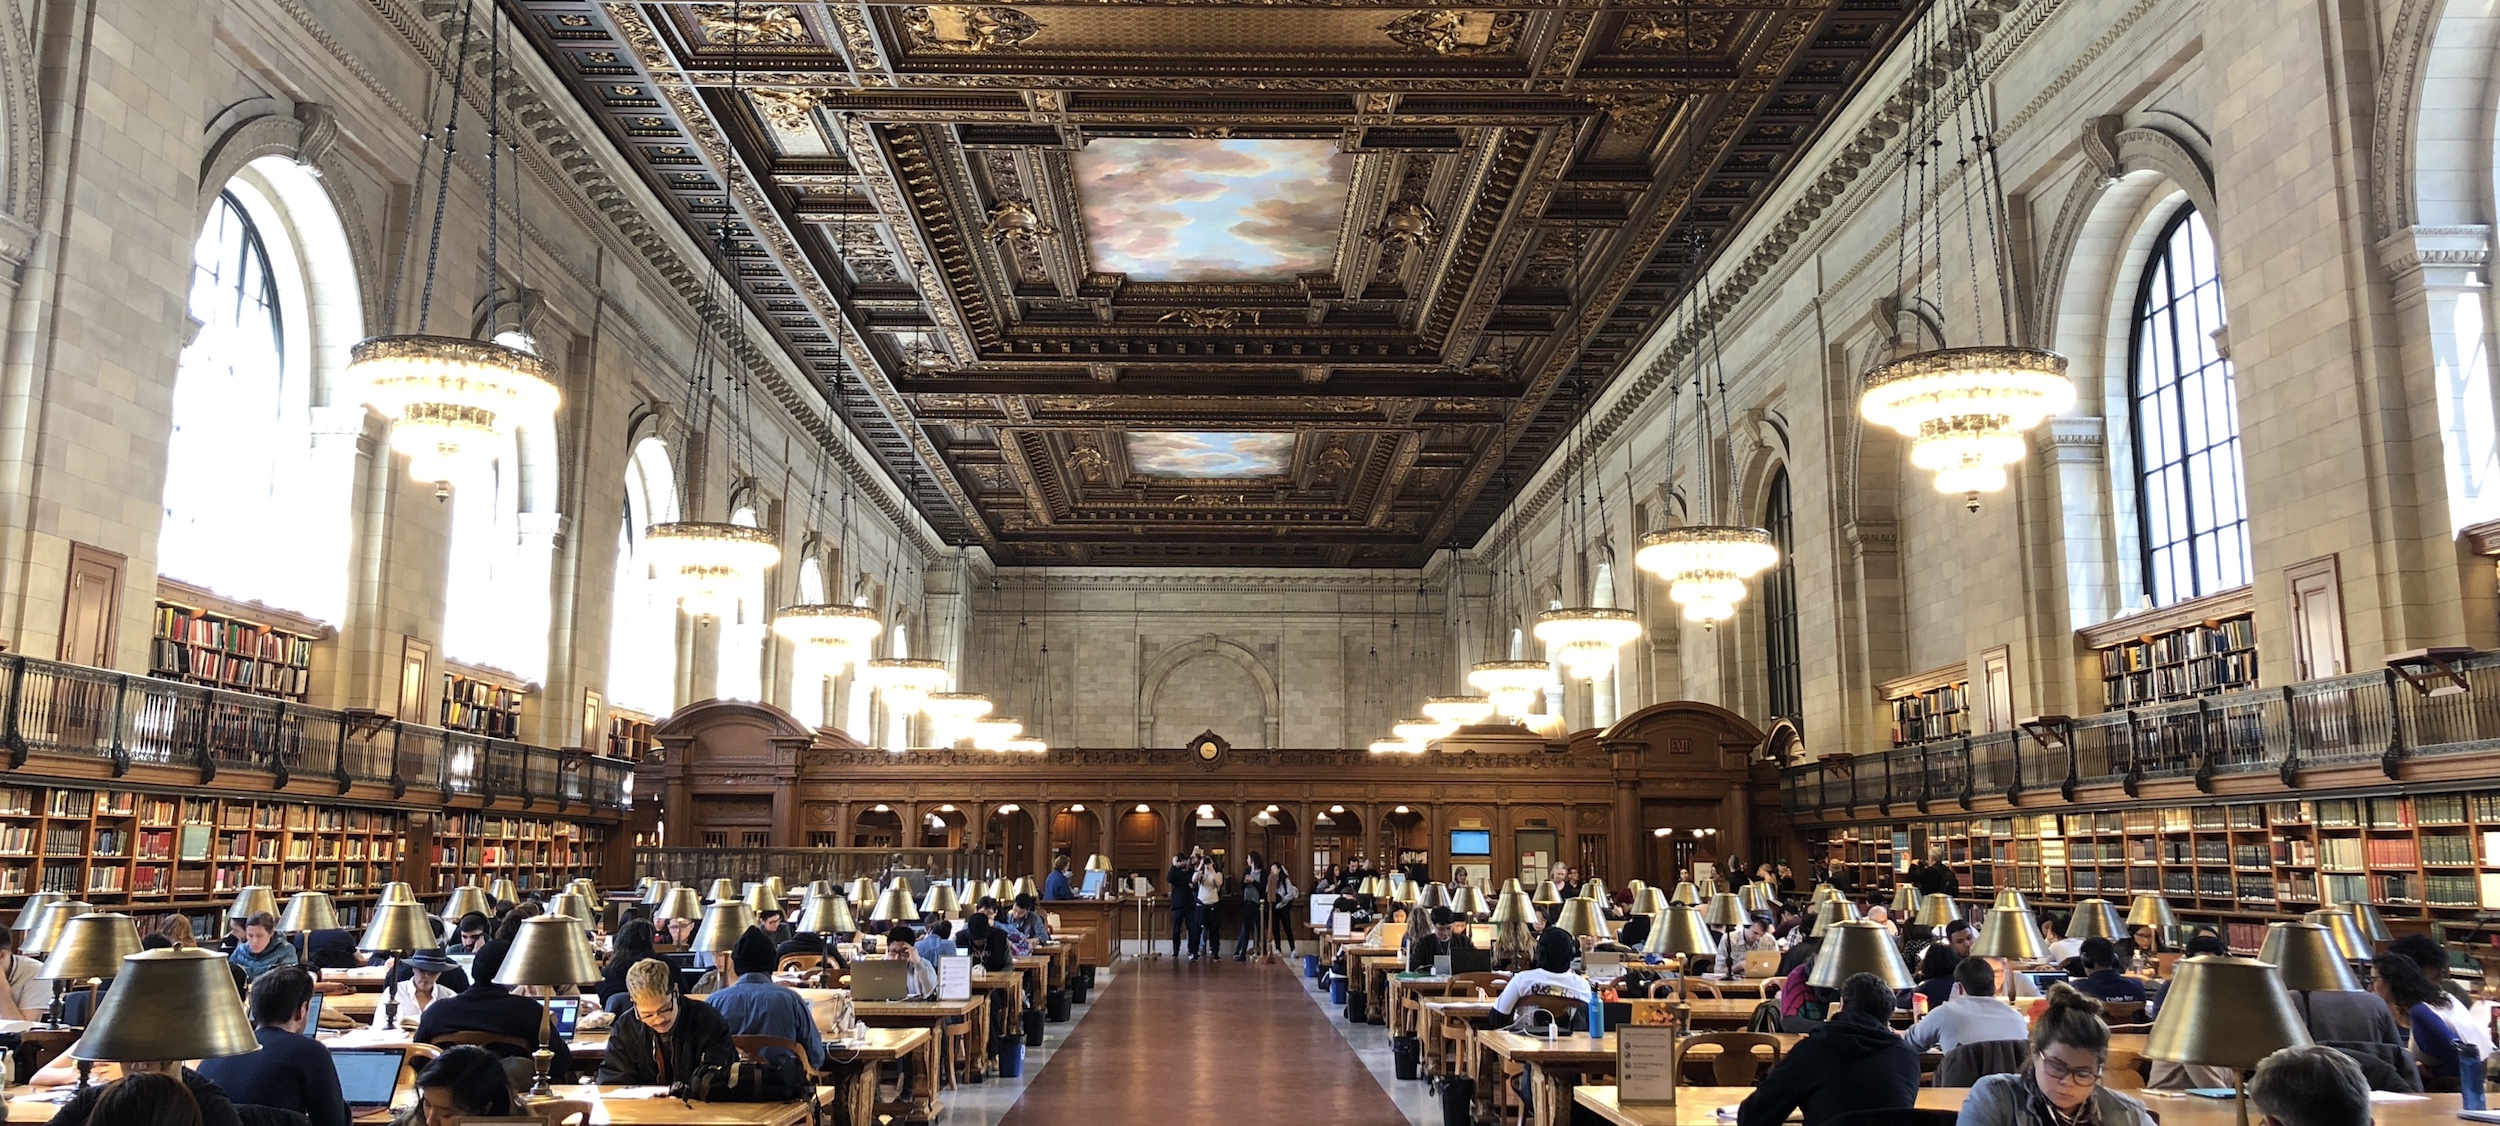 NYPL is a place to go to and learn from others